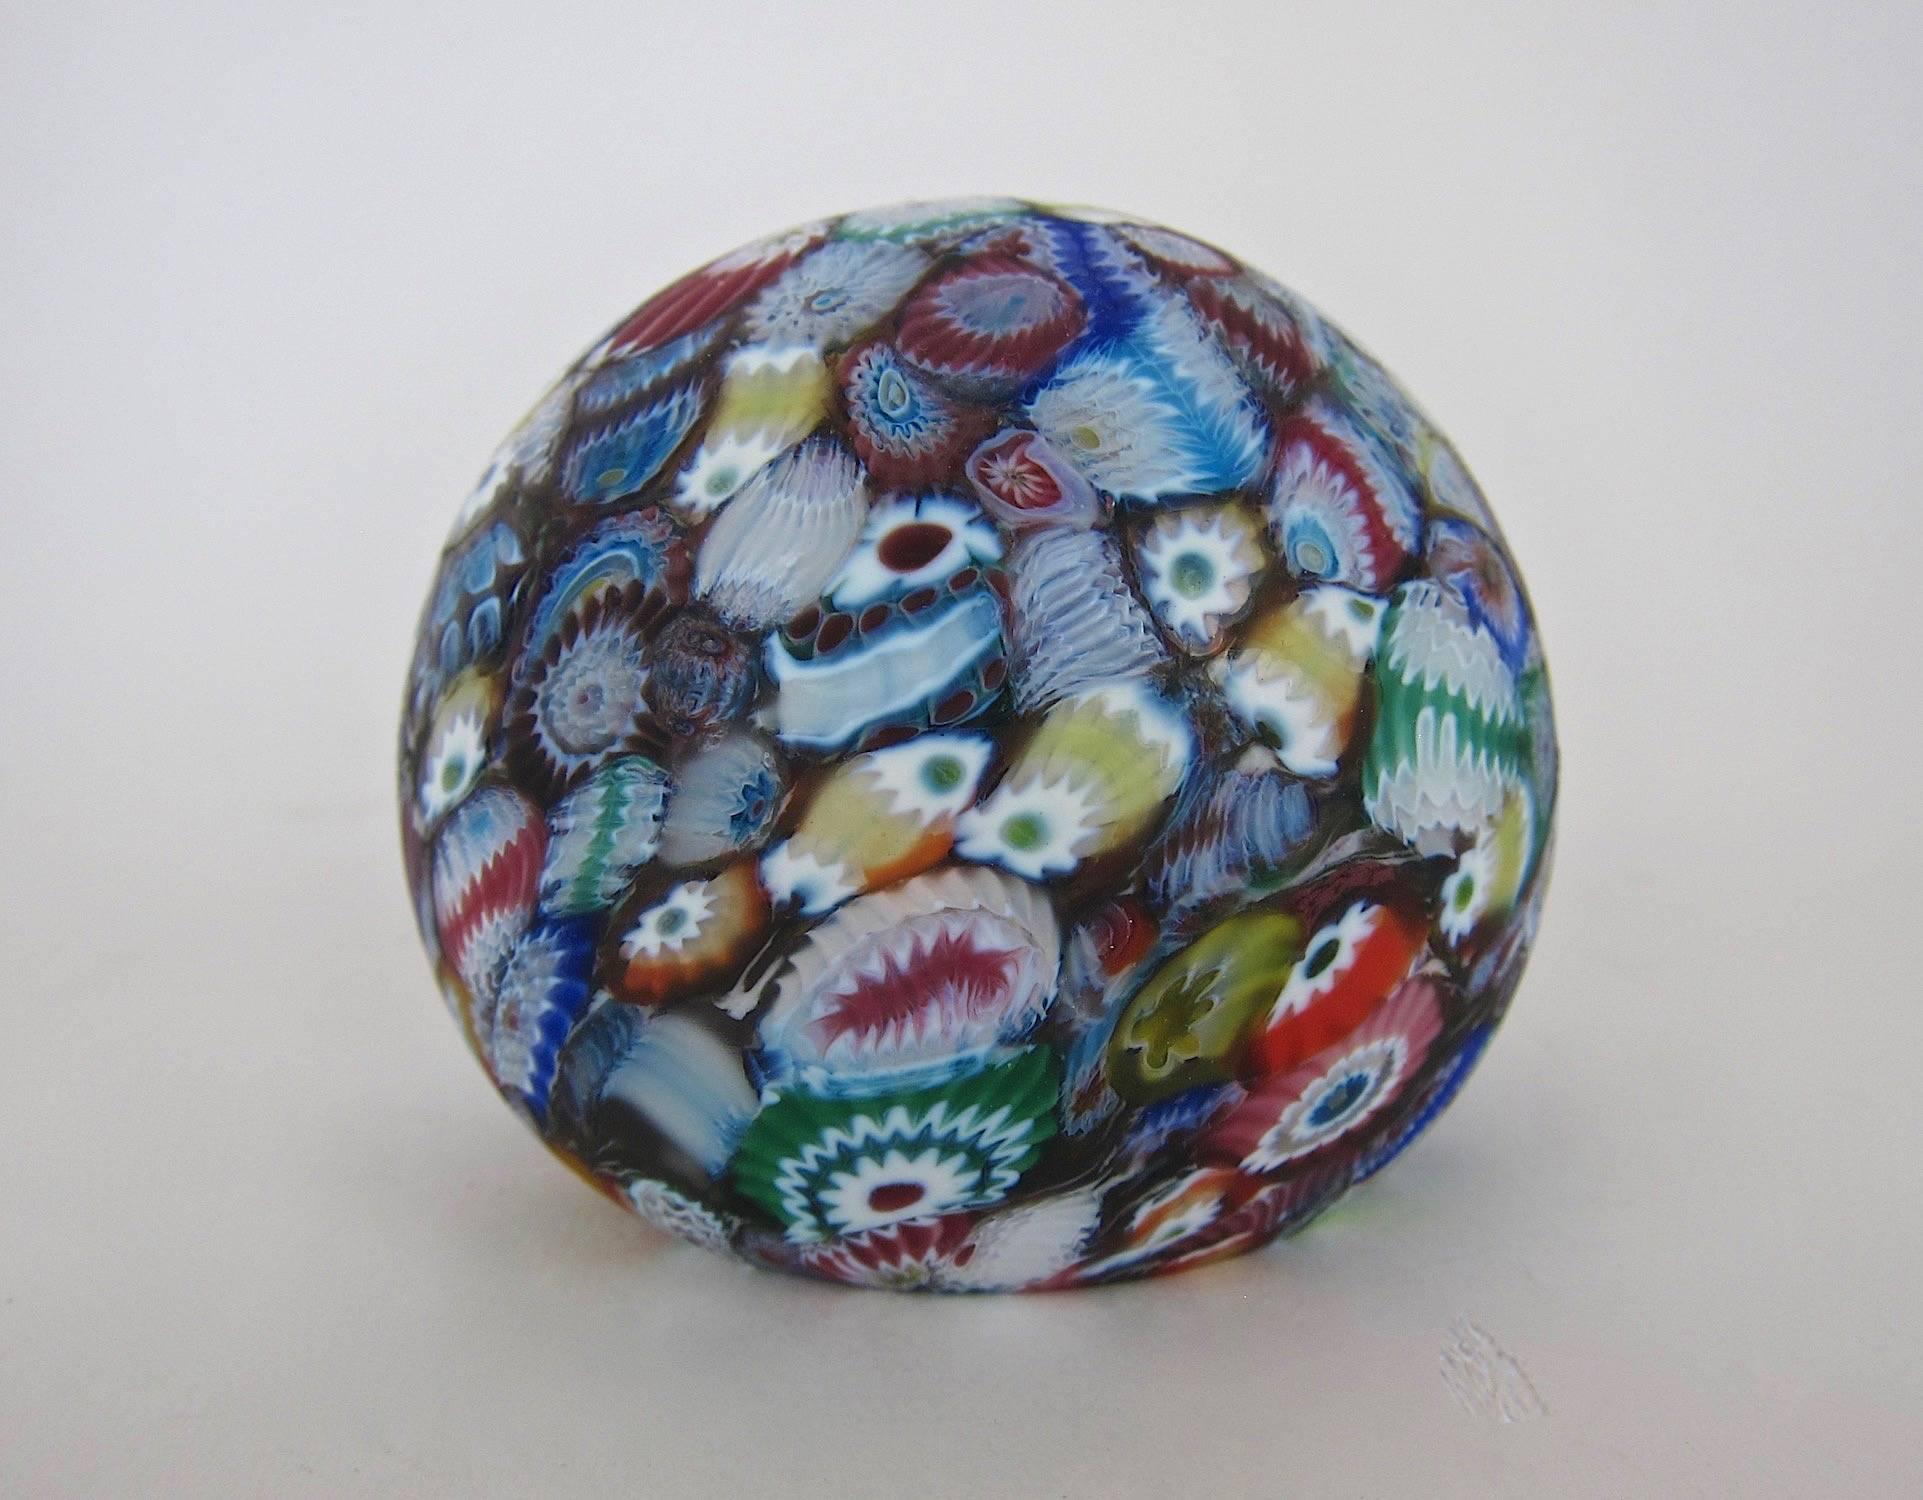 A vintage Murano art glass crown paperweight, handcrafted with multicolored millefiori (murrine) canes in a scattered or end-of-day design against a dark ground. The solid glass weight has a satin matte finish and is unmarked but likely by Fratelli